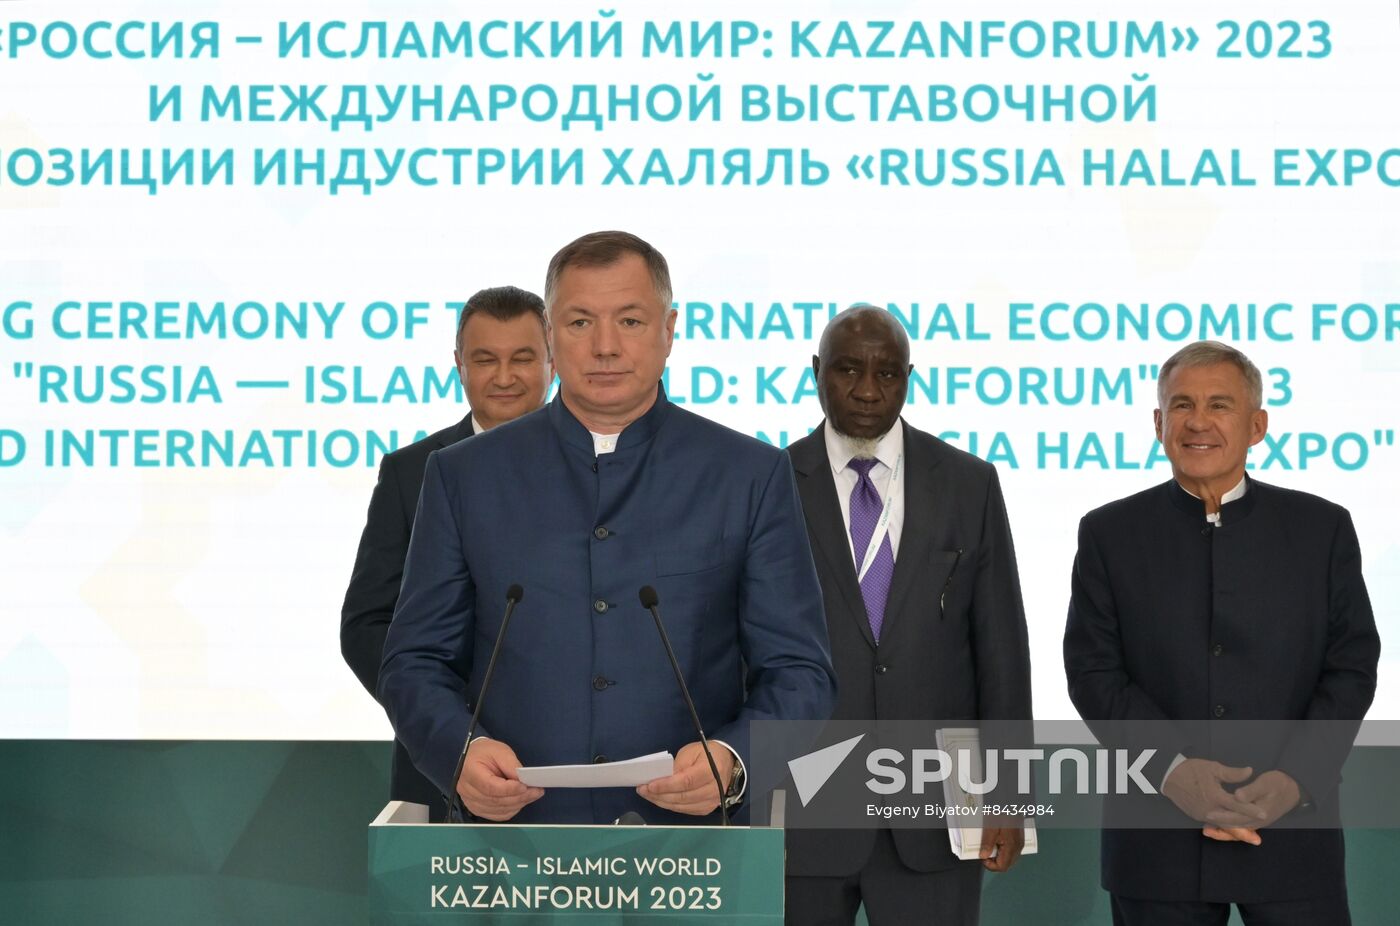 KAZANFORUM 2023. Official opening ceremony of international exhibition RUSSIA HALAL EXPO 2023